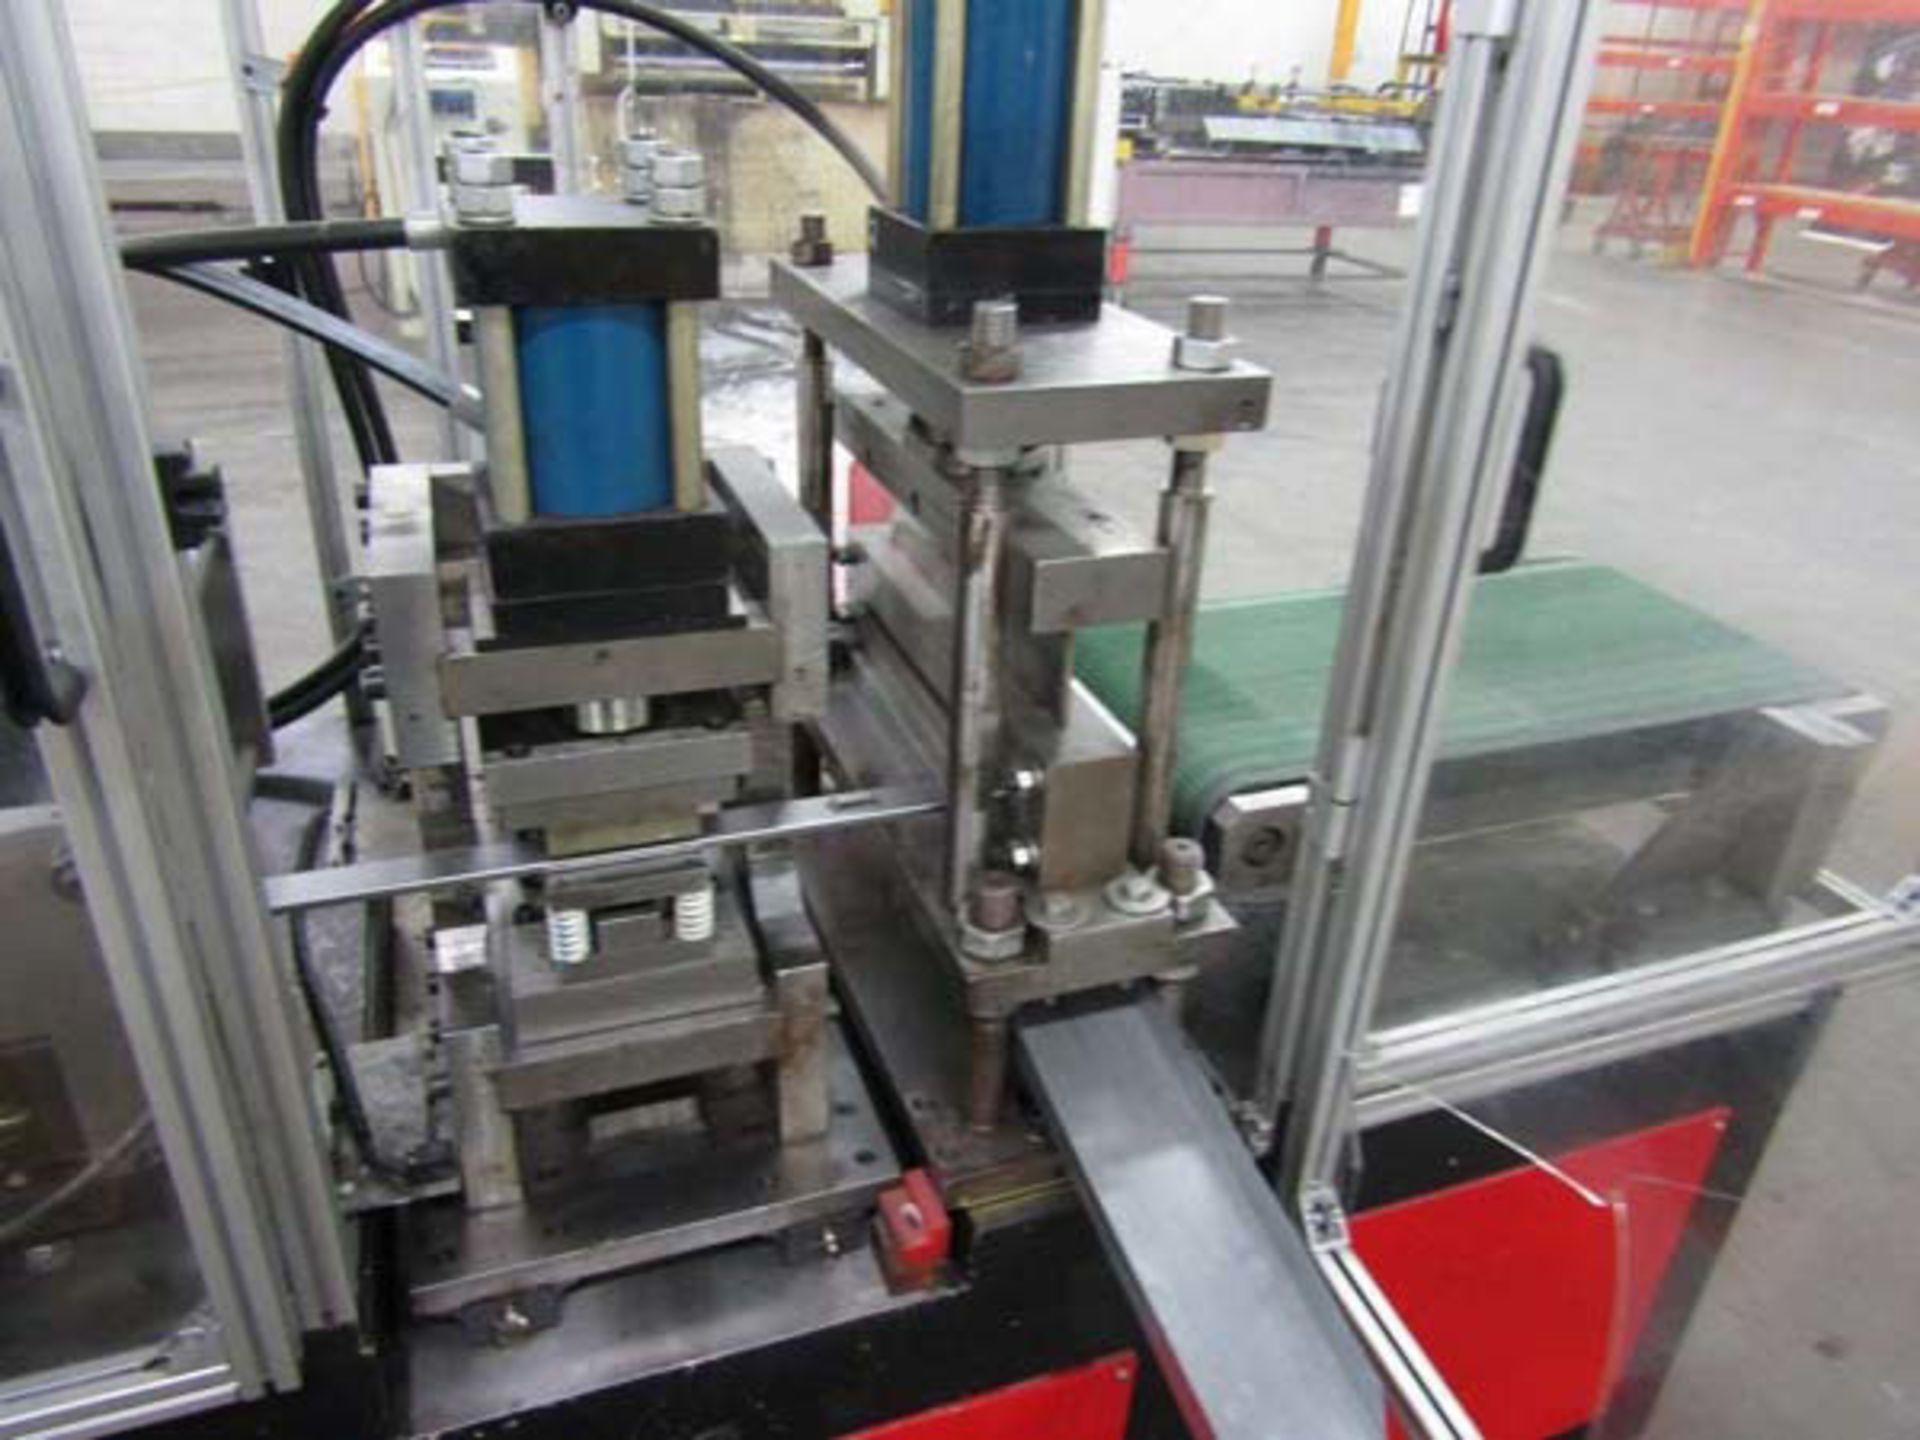 2016 ACL Rollforming Line | 14 Stand x 13.75" RS x 1.5" Shaft, Mdl: LZJ-HCB, S/N: 16111001 - 8448P - Image 6 of 12